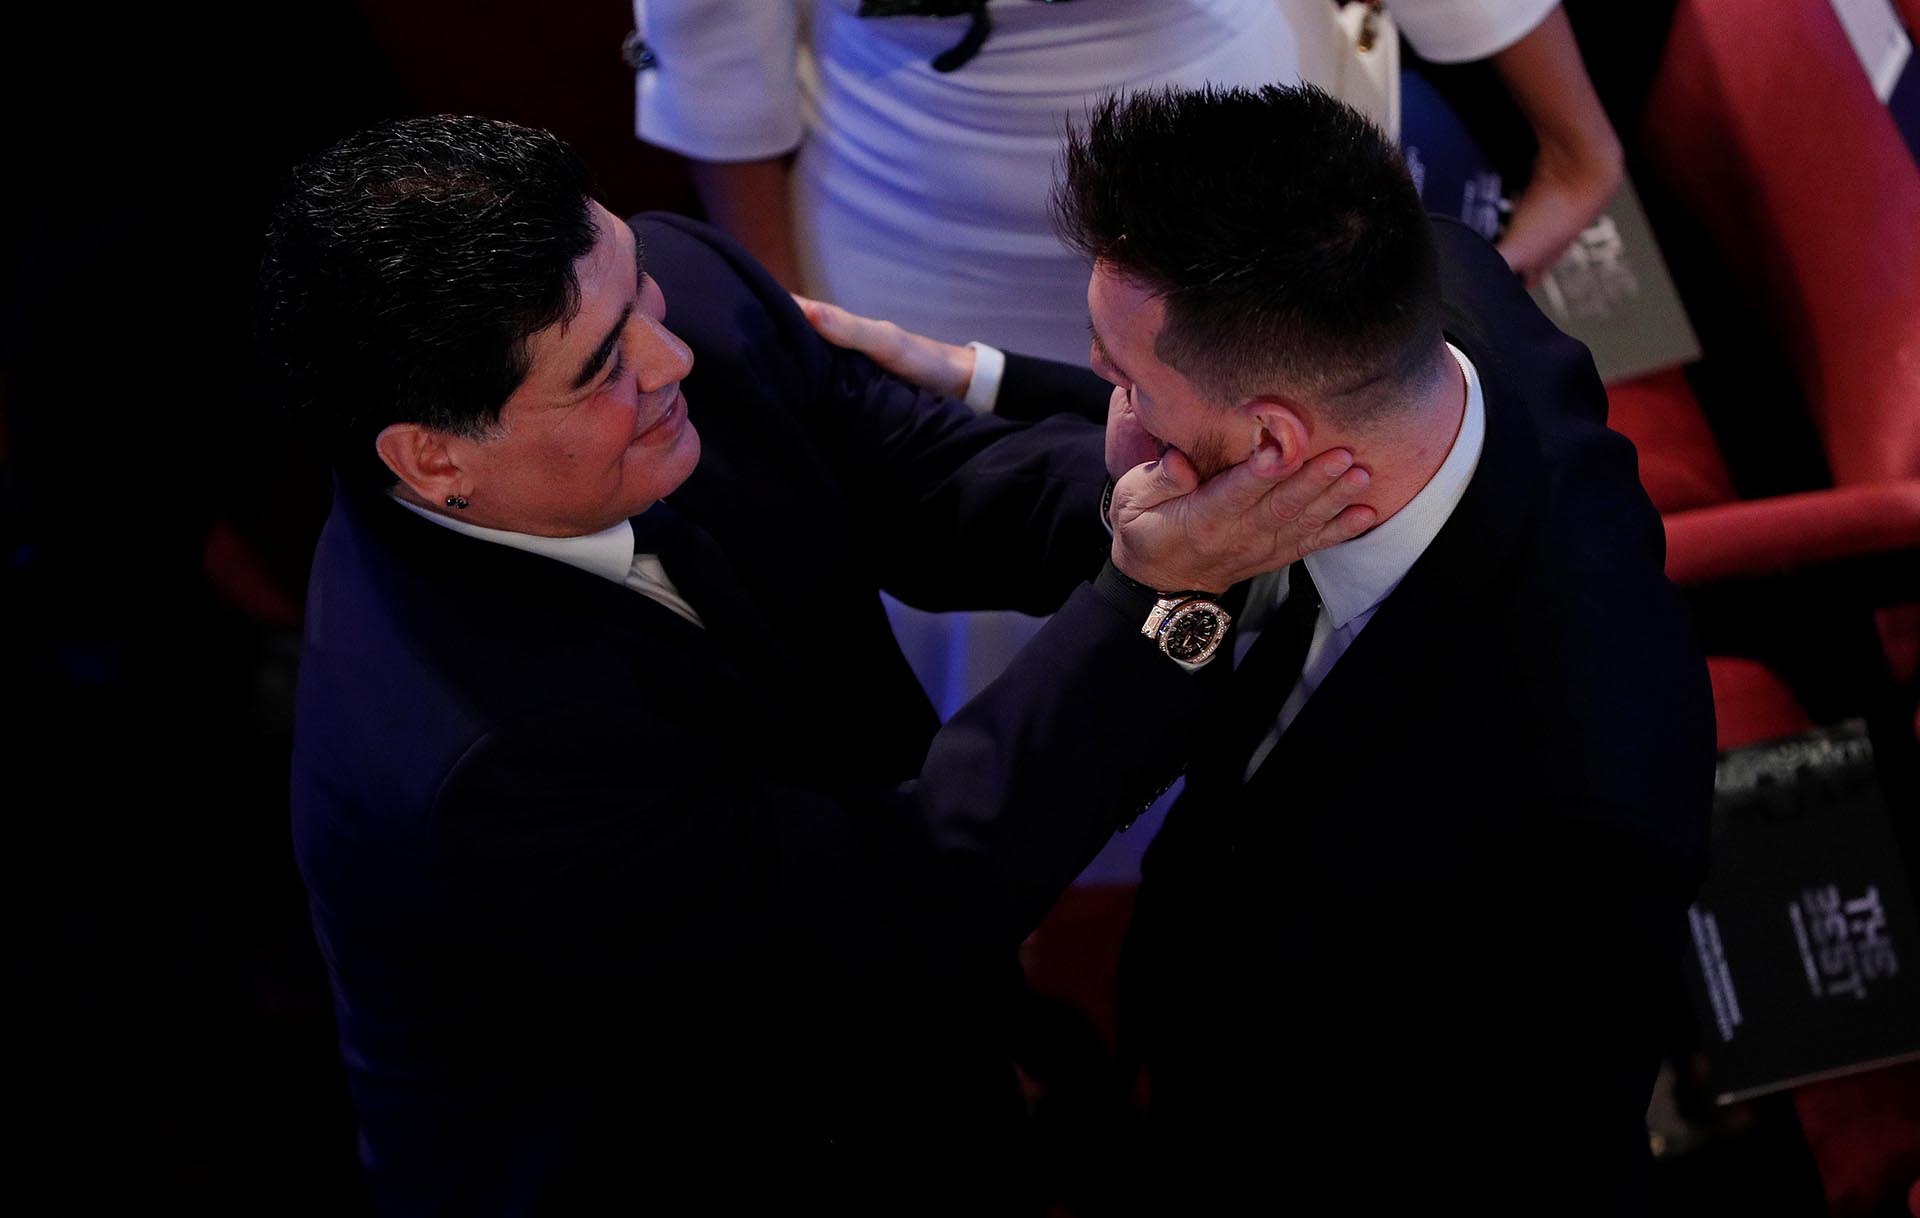 Soccer Football - The Best FIFA Football Awards - London Palladium, London, Britain - October 23, 2017   Barcelona’s Lionel Messi speaks with former Argentina player Diego Maradona before the start of the awards   Action Images via Reuters/John Sibley